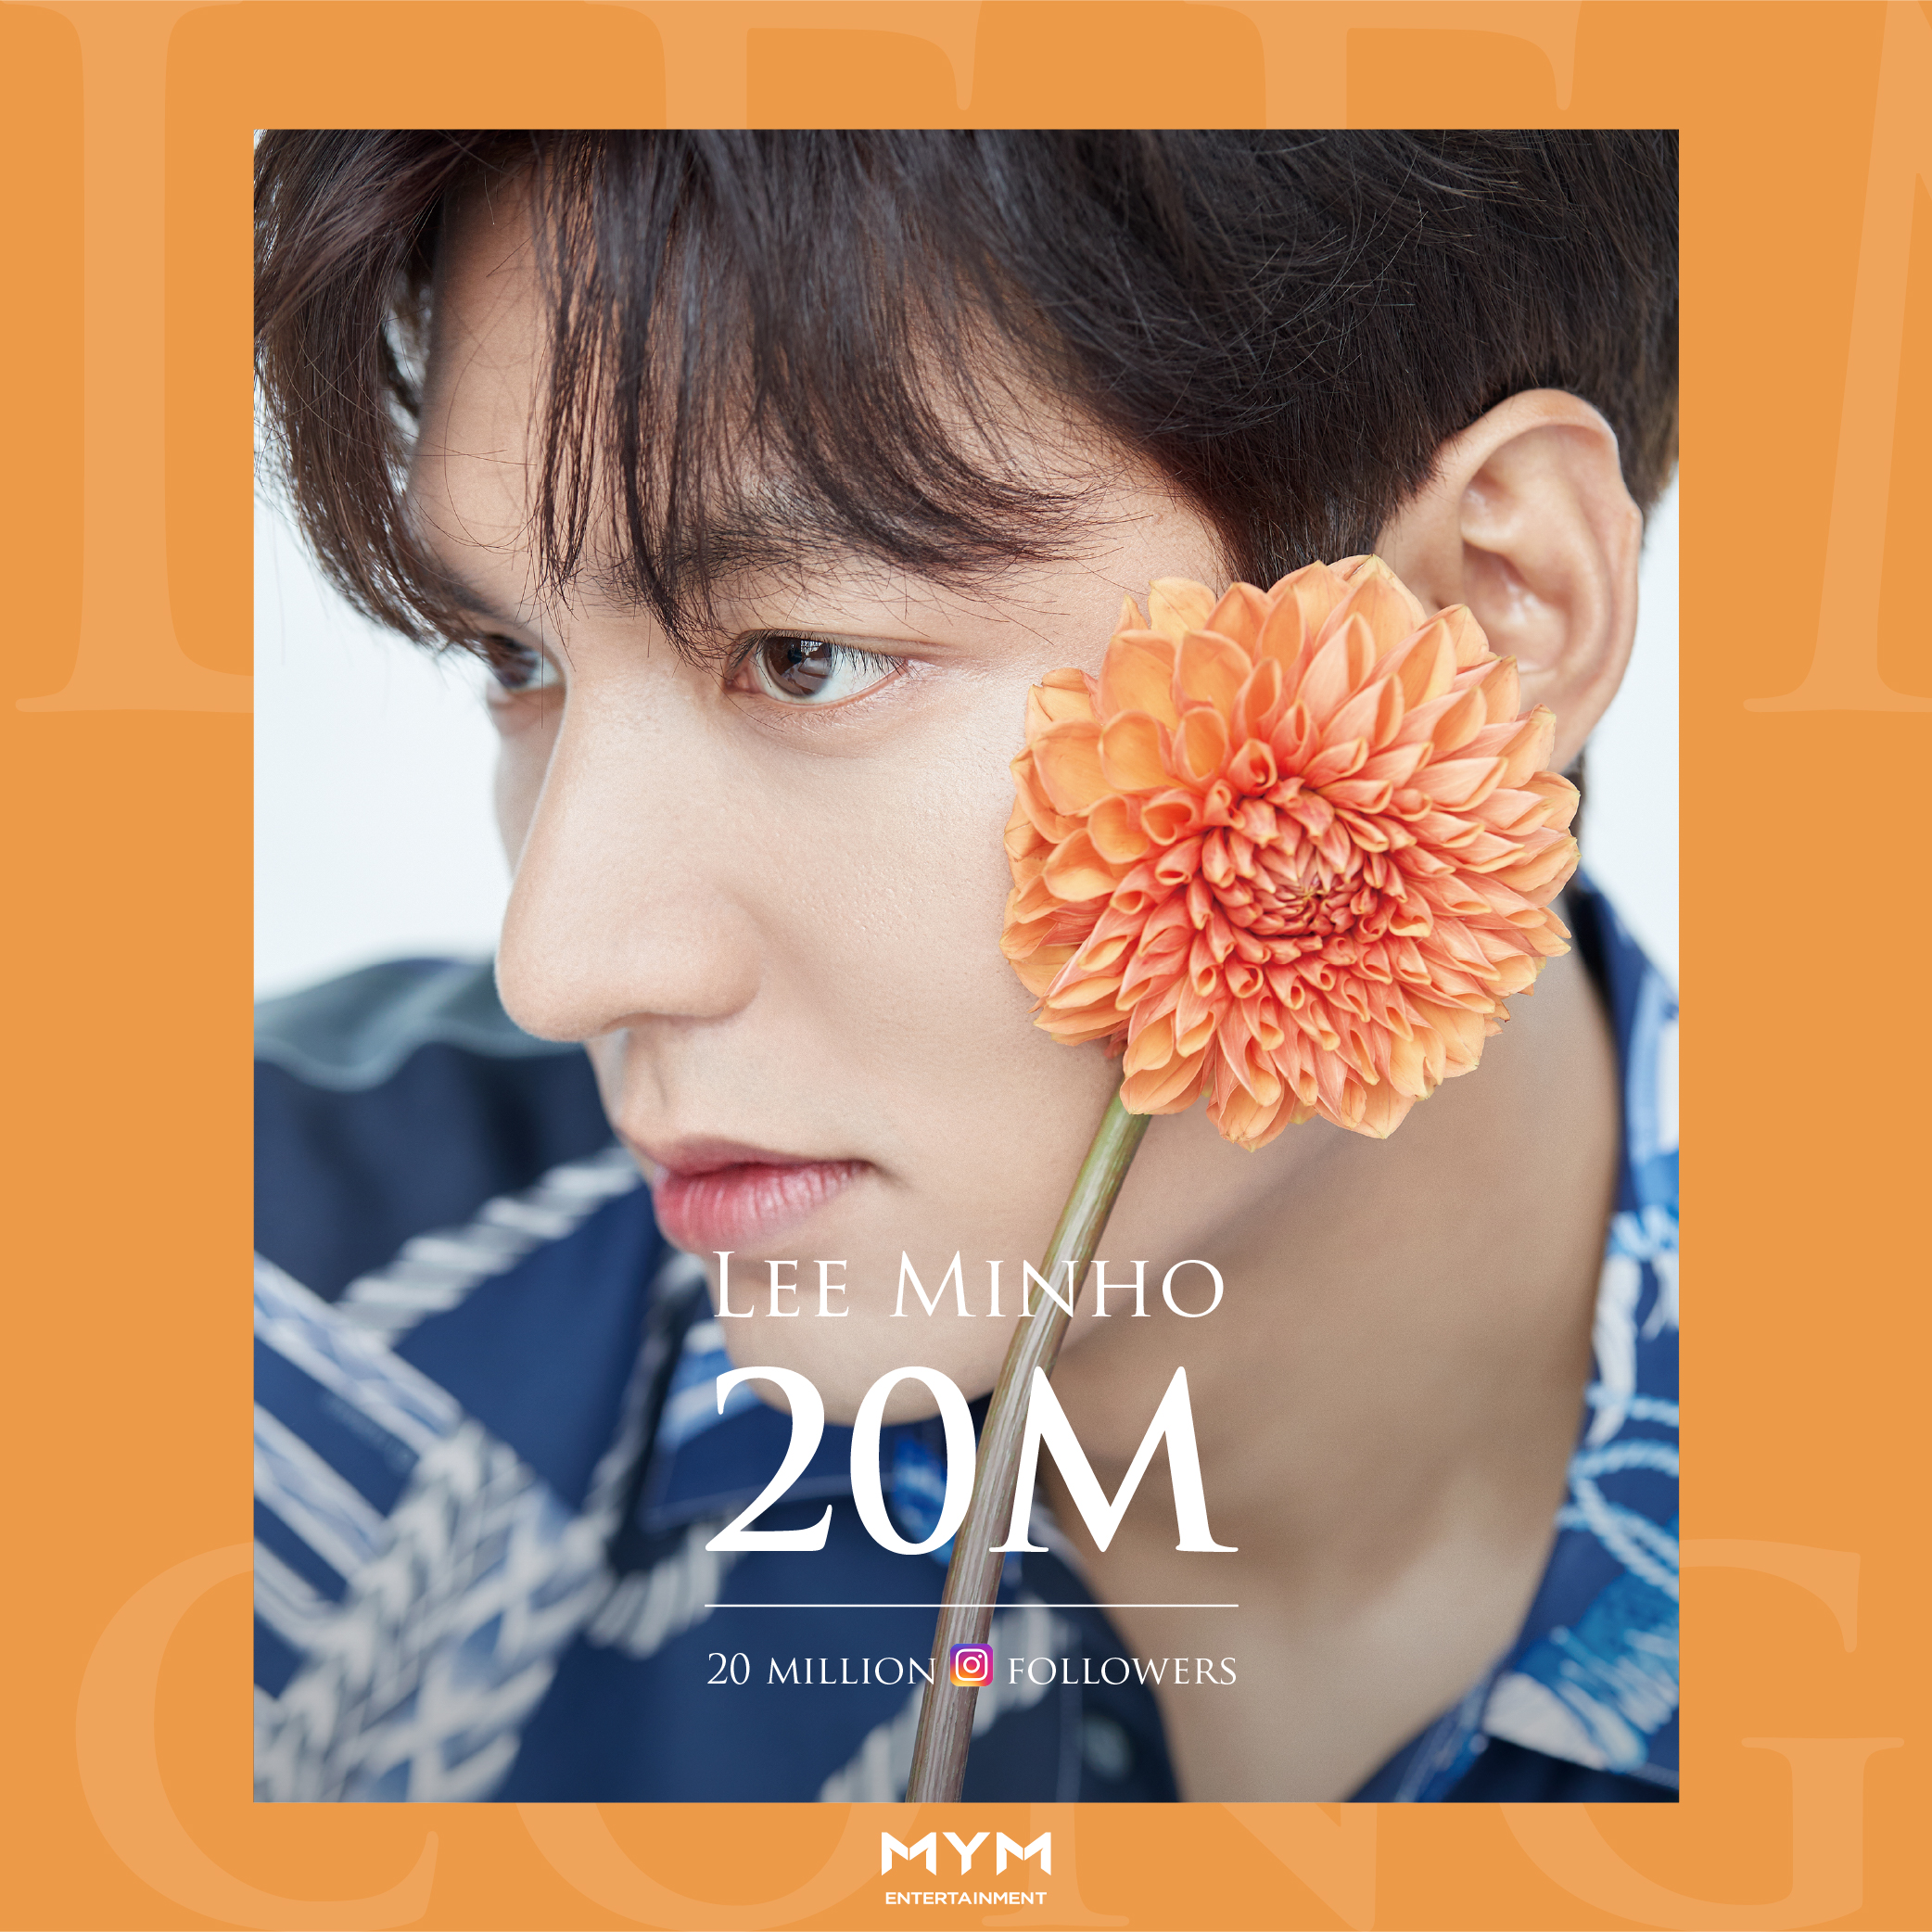 Lee Min-hos Facebook and Instagram Followers numbers each topped 20 million, with the total number exceeding 40 million.This is the first time Lee Min-ho has been a domestic singer and actor, with 20 million Followers at the same time on two channels representing the SNS platform.On the 18th, Lee Min-hos agency MYM Entertainment posted a photo celebrating the achievement of Facebook 20 million Followers through official SNS.Soon after, Lee Min-hos Instagram account surpassed 20 million Followers on October 4, and once again thanked fans for posting a picture of Lee Min-ho with Followers with the phrase 20 MILLION.Lee Min-ho in the public photos captivated many people with an overwhelming visual and eye-catching atmosphere.The size of the Followers secured on Lee Min-hos main social media is beyond imagination.The number of Weibo Followers, Chinas leading SNS, exceeded 2,863 million, and Twitter exceeded 3 million (as of October 4).Lee Min-ho is the only domestic artist with this record.Currently, Lee Min-ho creates modifiers such as boyfriend terminator every time he releases recent photos through SNS, and shows the topic of the top of the followers scale.Lee Min-ho also received more than 14 million votes in the final total of 100 Most attractive Celebs in Asia in 2020 announced at King Choice in September, ranking third among Asian celebrities and first as Koreas The Artist.This record not only proved Lee Min-hos worldwide popularity, but also made his status as a global TOP actor realize.Lee Min-hos latest film, The King: The Lord of Eternity (hereinafter referred to as The King), was streamed worldwide through Netflix, the worlds largest OTT, and recorded results, followed by Top 10, the most viewed content in the Netflix Asia region.According to FlixPatrol, which provides a database of video content, Netflix has been ranked Top 10 for 124 days, proving Lee Min-hos global power once again.Meanwhile, Lee Min-ho is taking a break after the end of The King and is reviewing his next work.iMBC  Photos Offering MYM